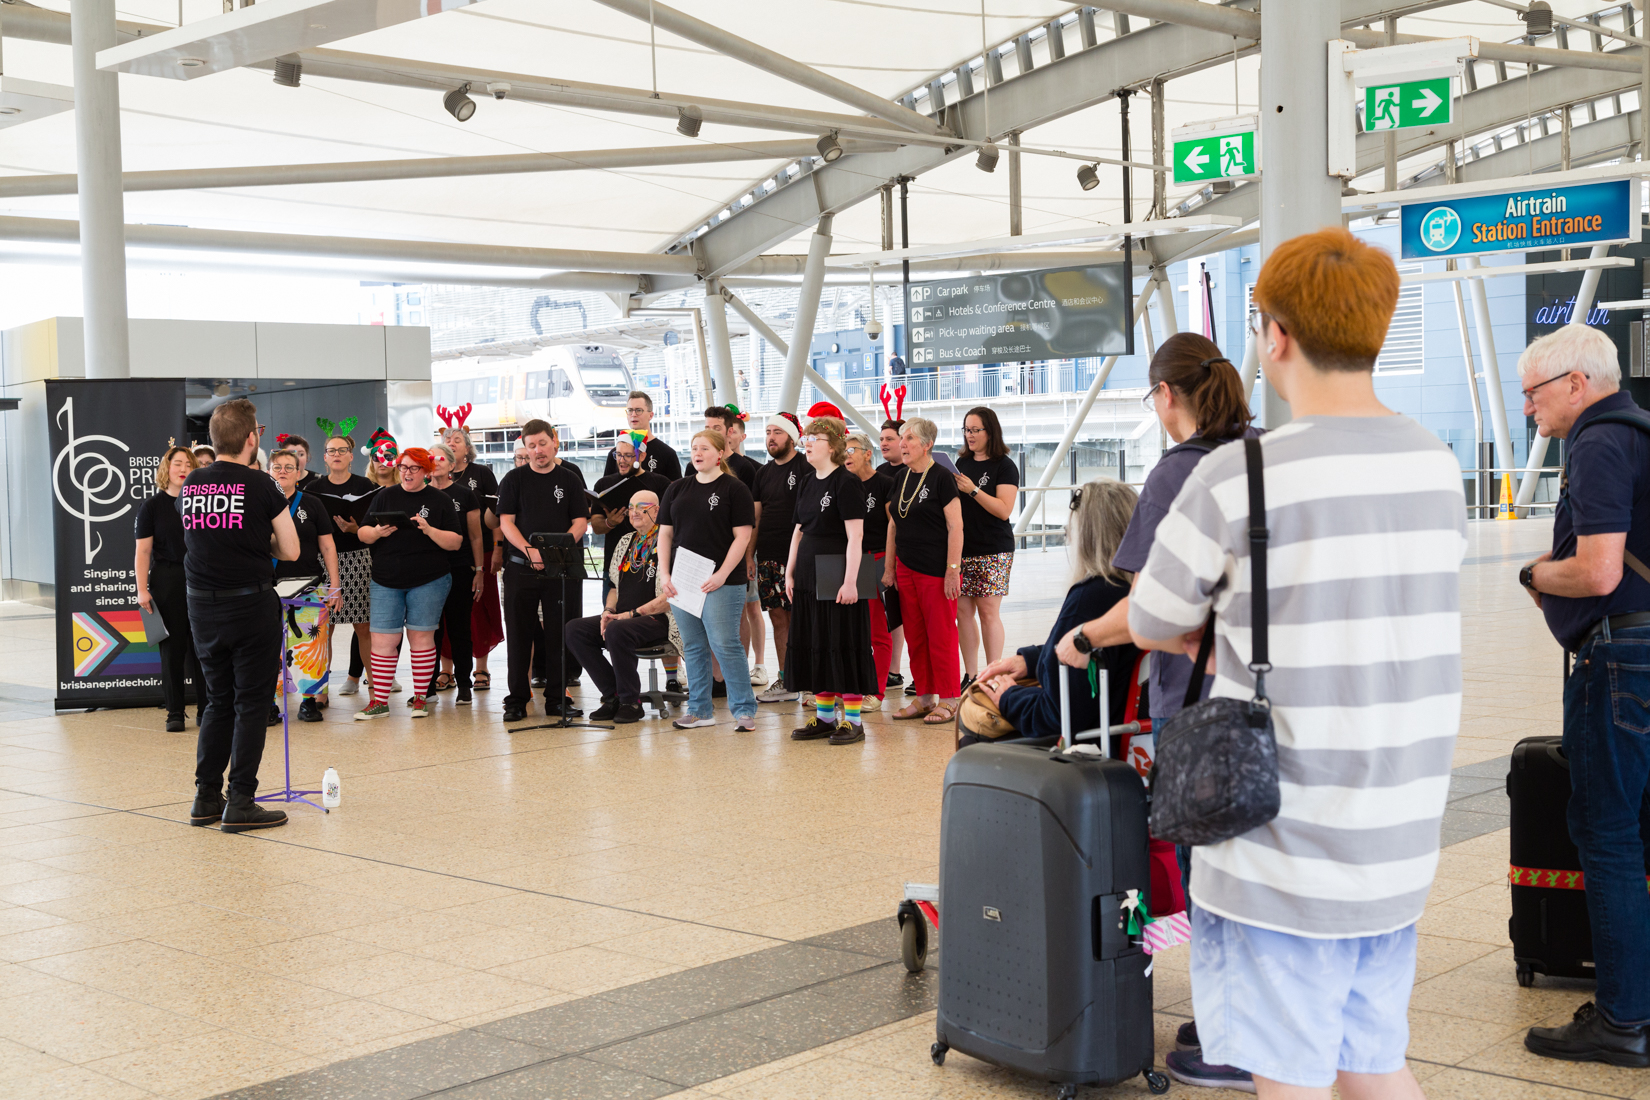 Brisbane Pride Choir performing at the airport with passengers watching them